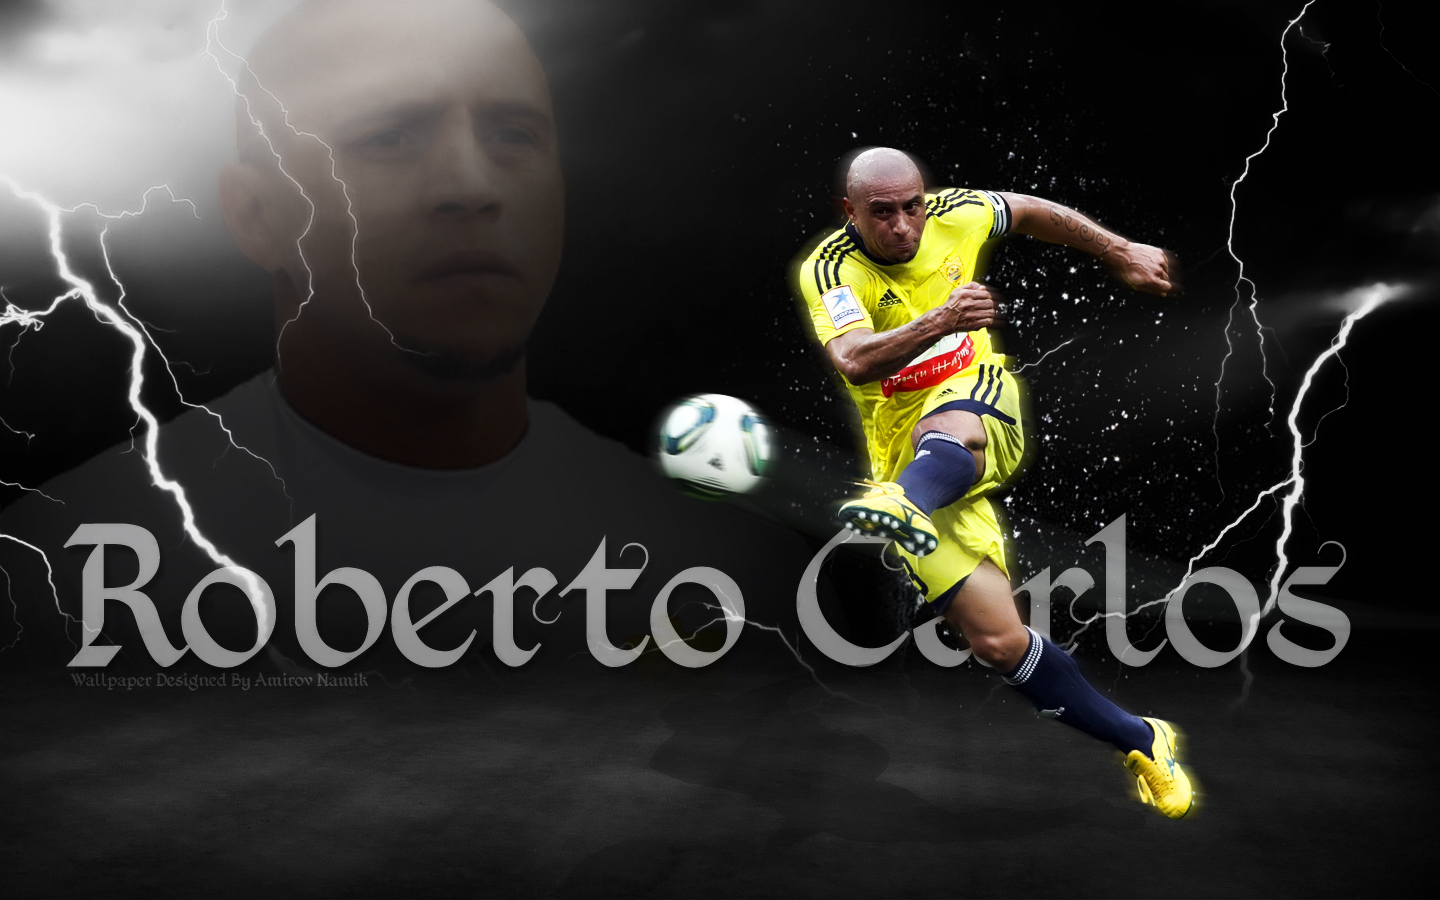 Roberto Carlos Picture by Namik Amirov - Image Abyss